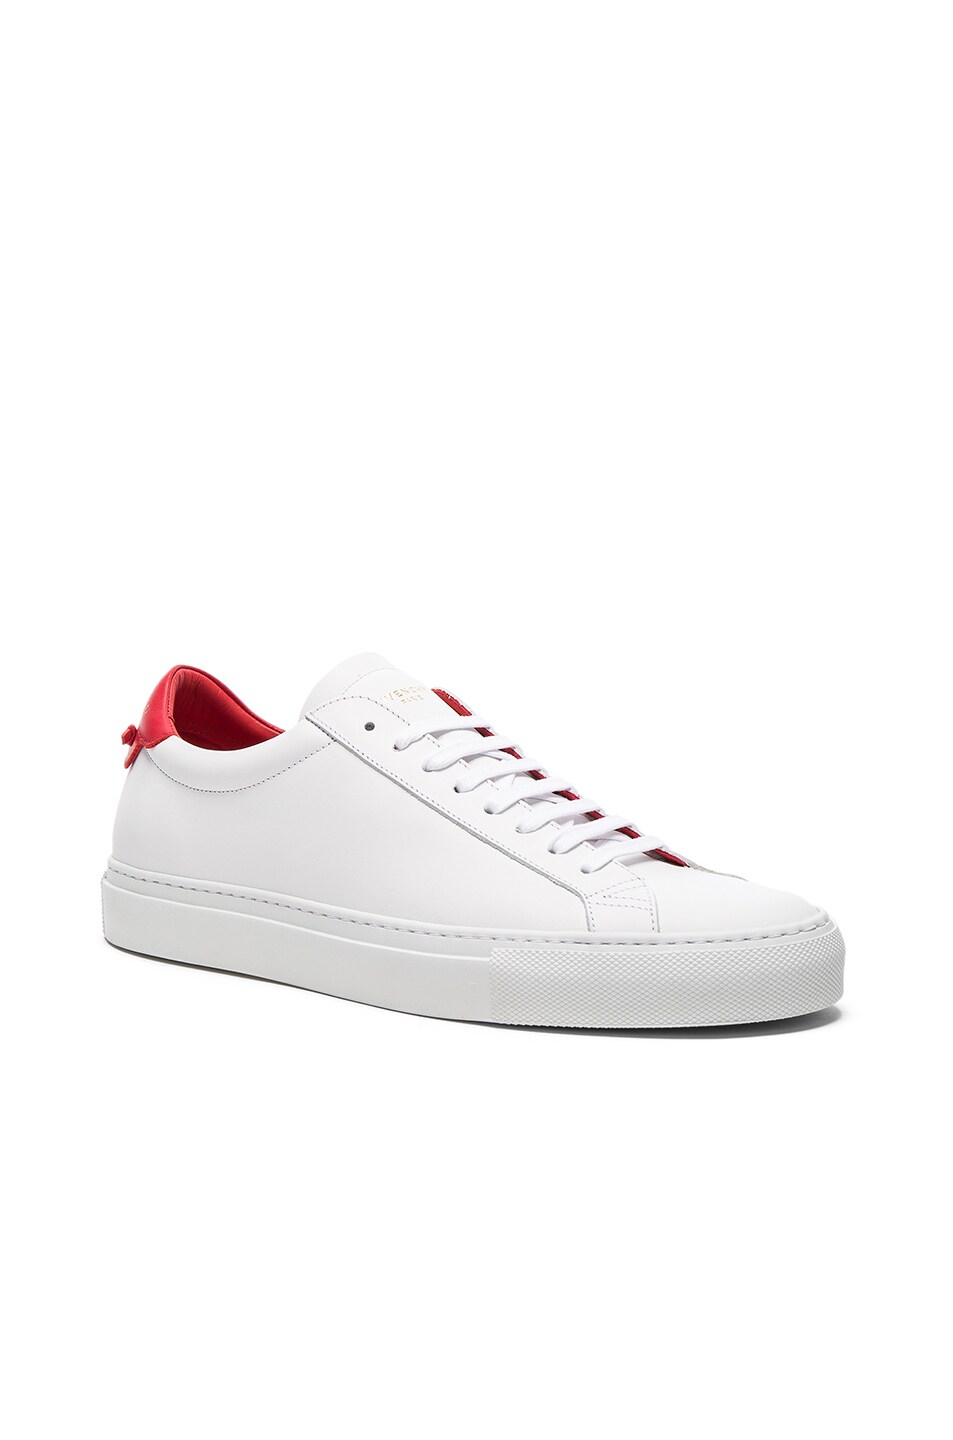 Image 1 of Givenchy Urban Street Low Top Sneakers in White & Red